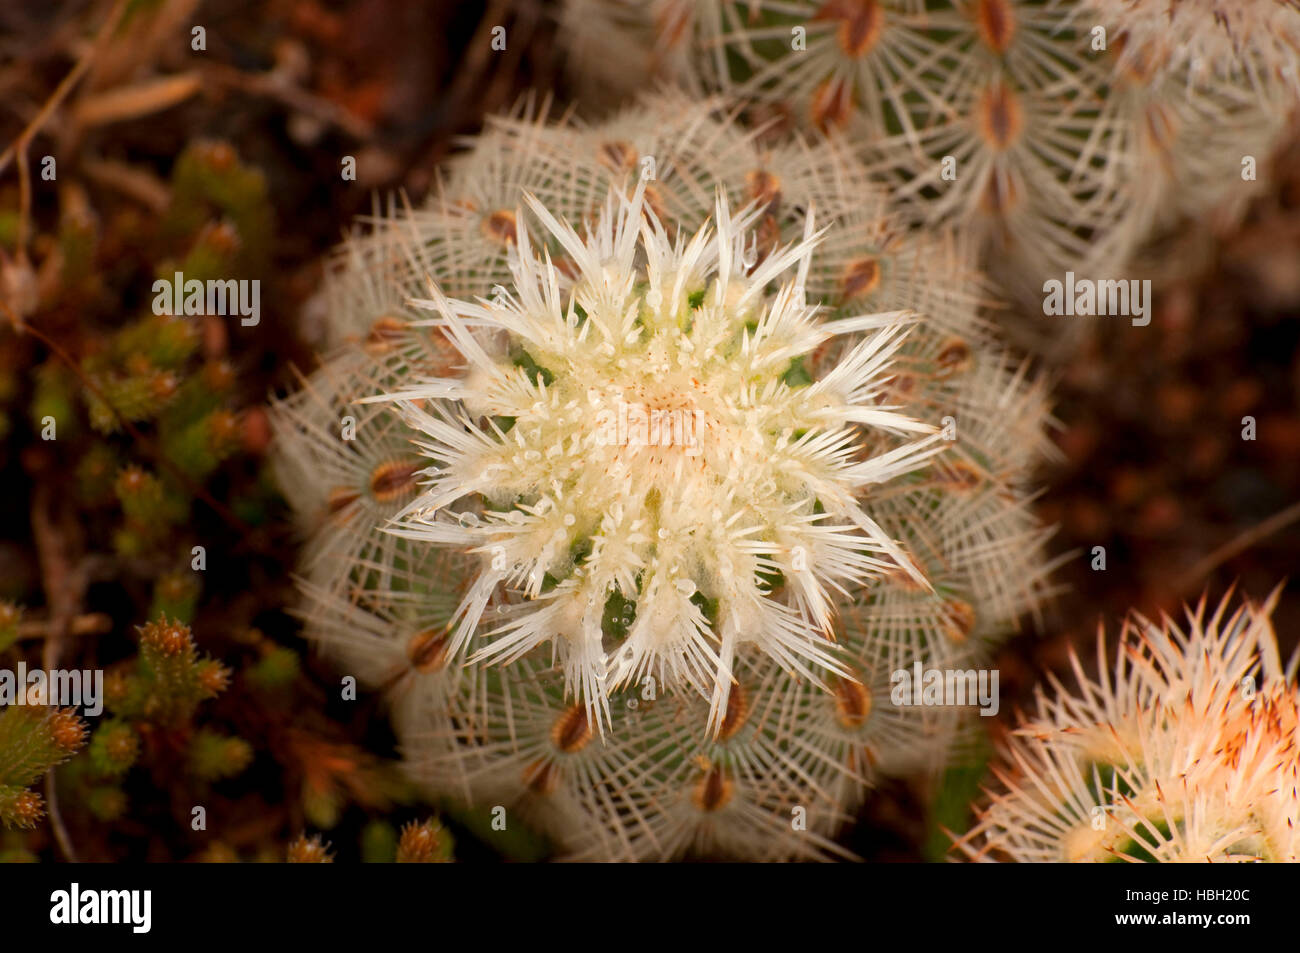 Lace cactus, Enchanted Rock State Park, Texas Stock Photo